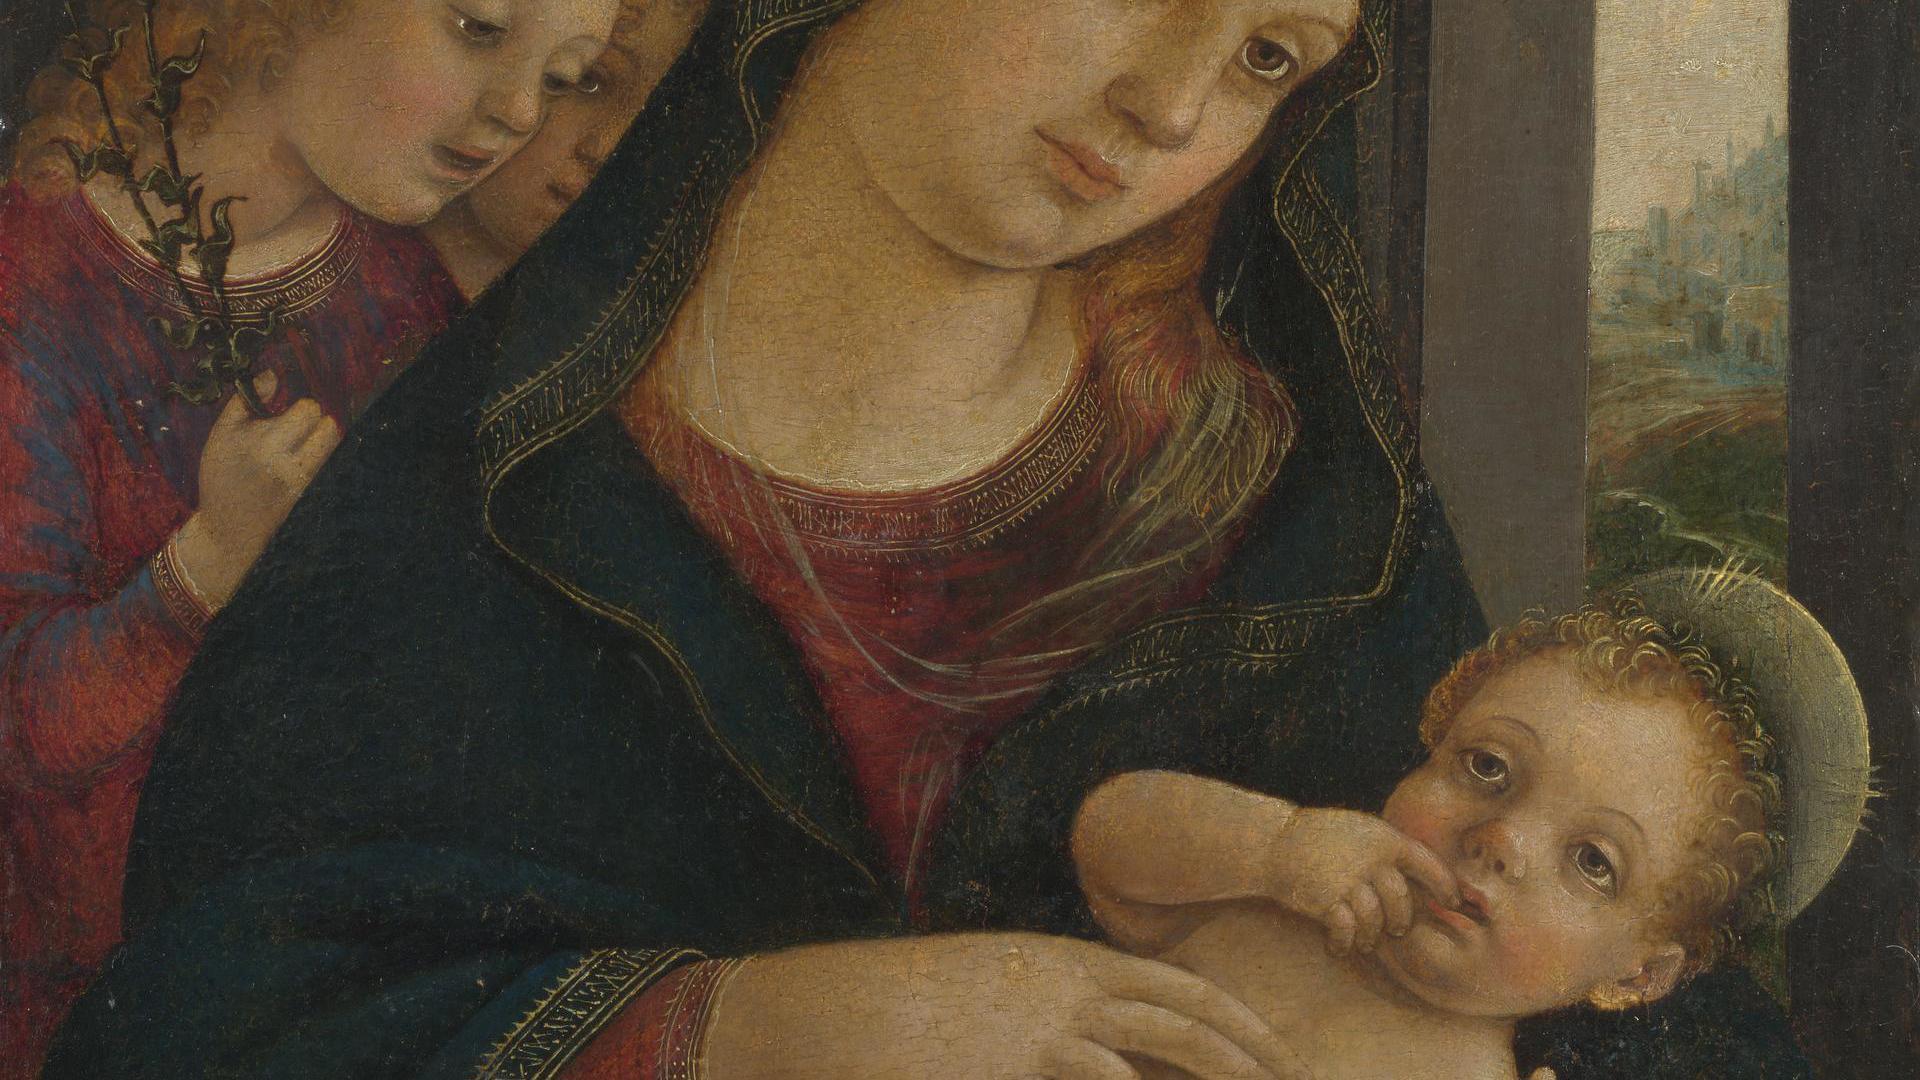 The Virgin and Child with Two Angels by Liberale da Verona